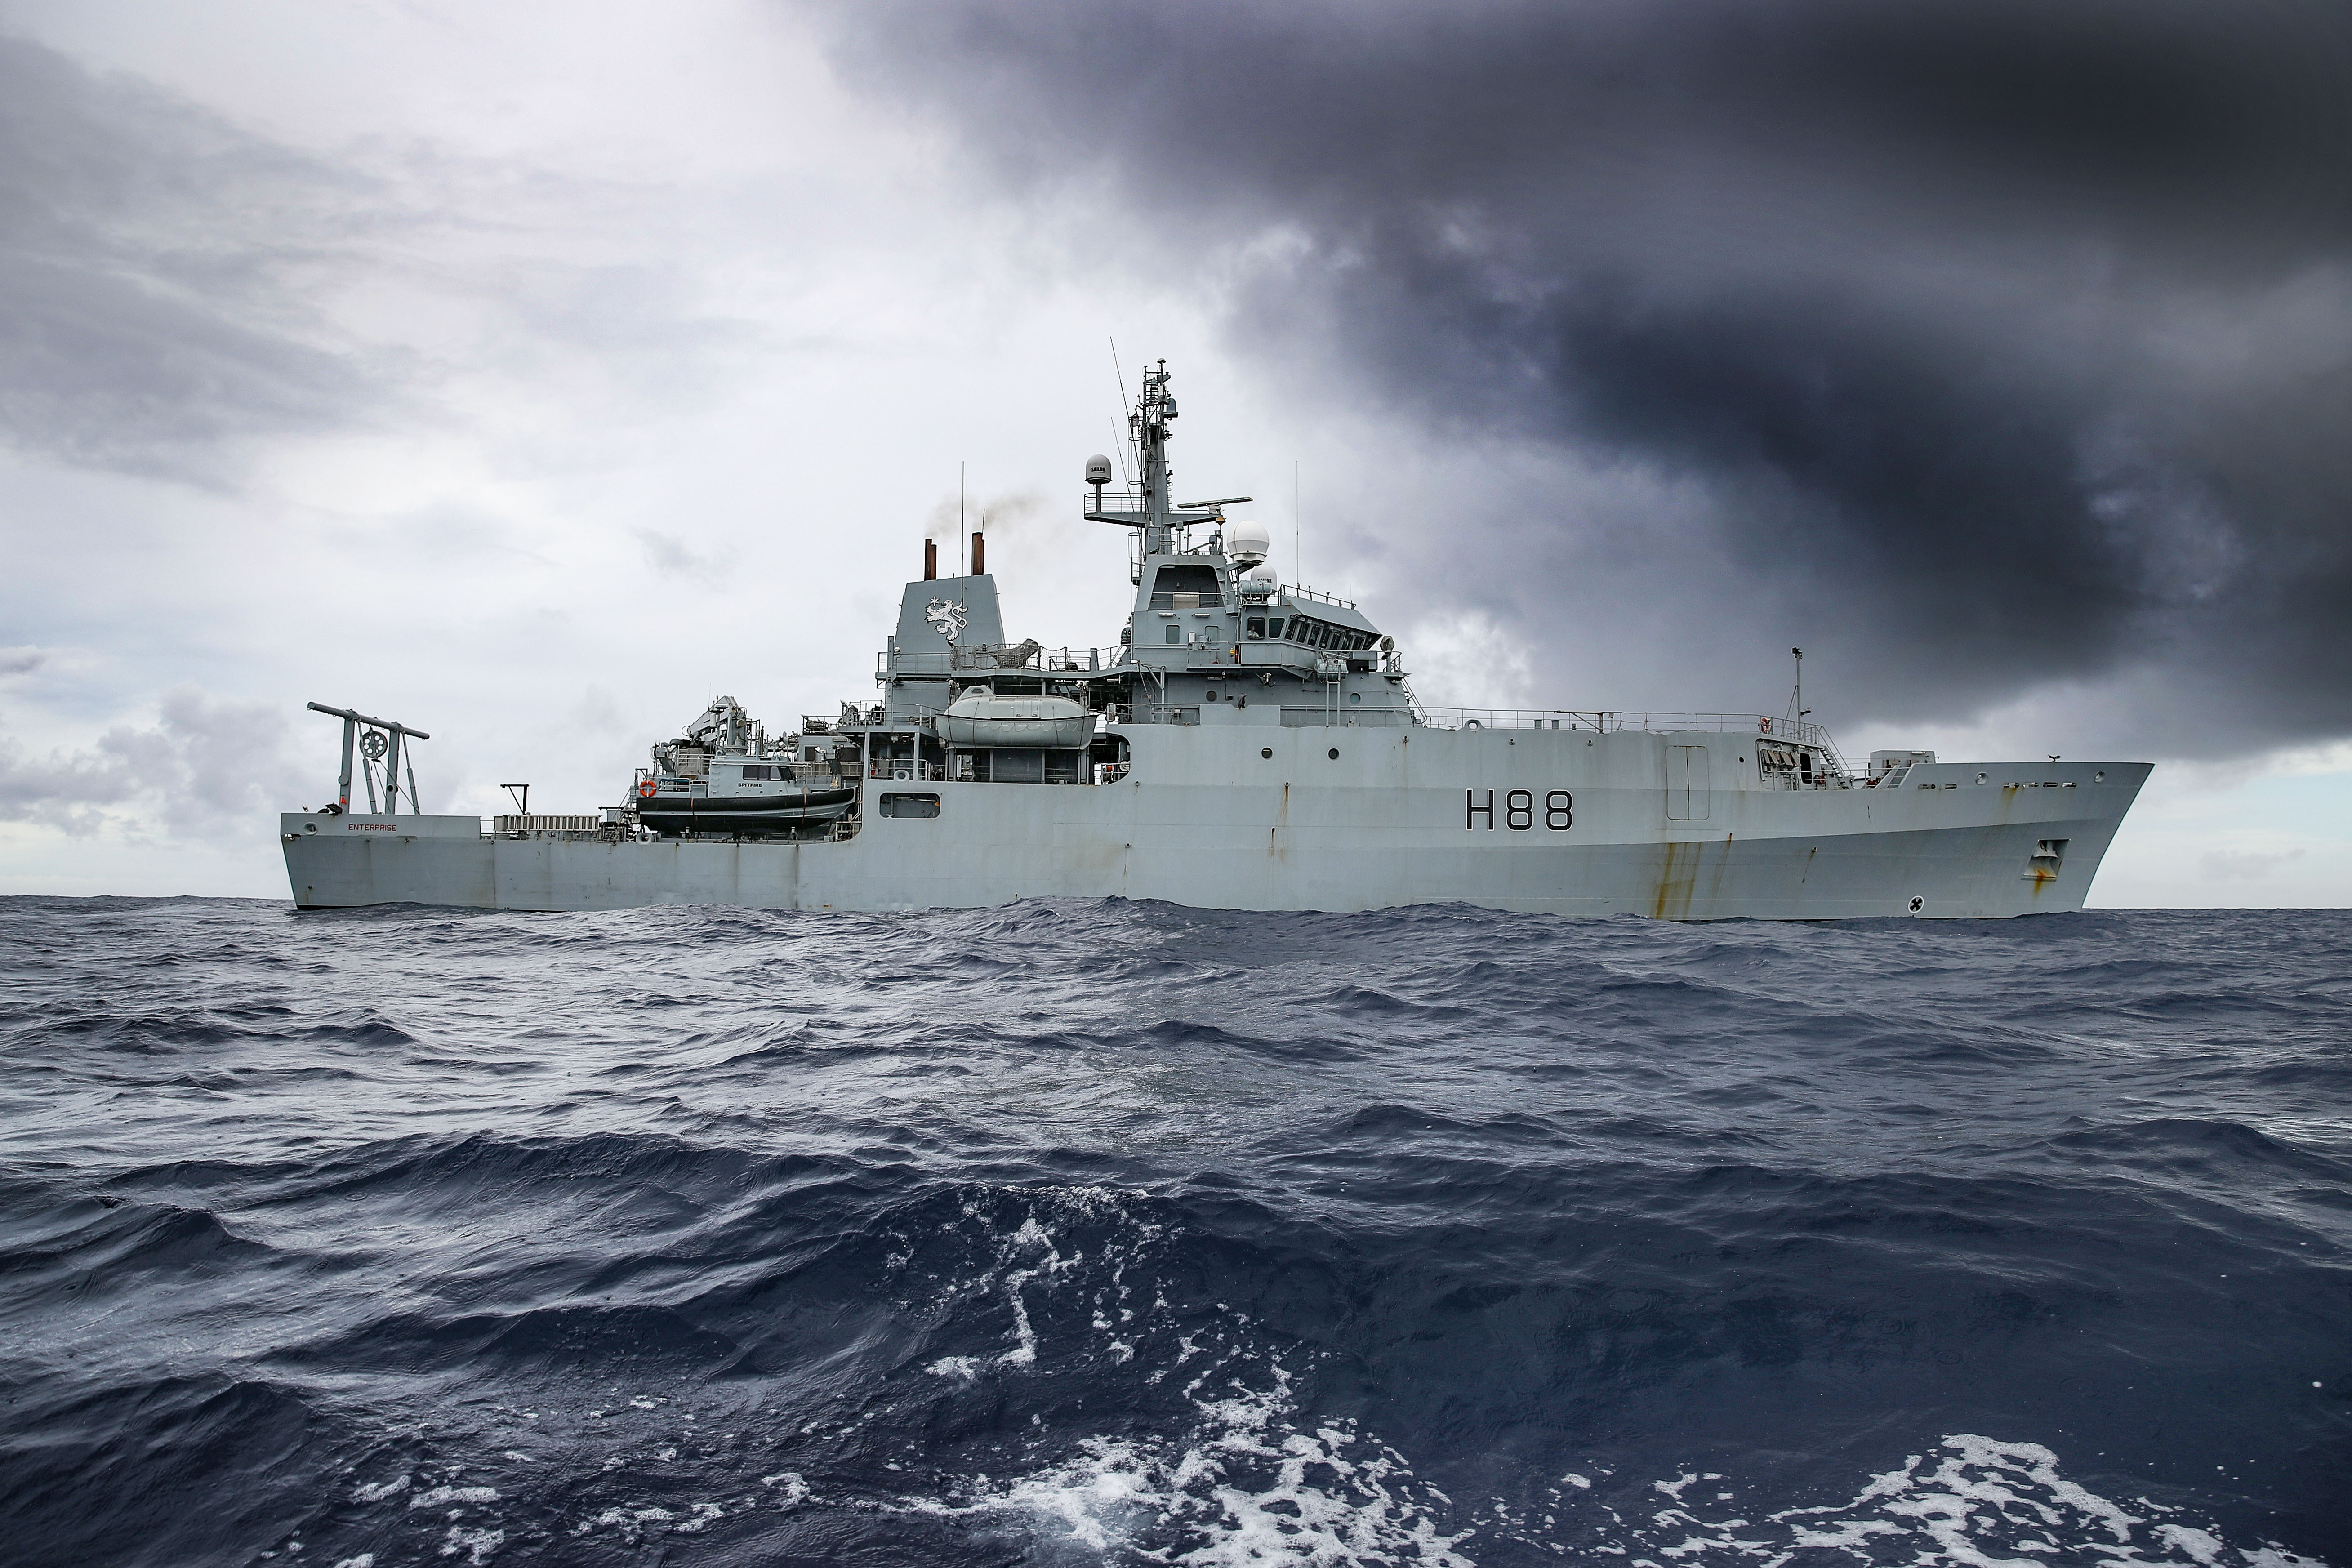 Hms Enterprise To Deploy To Beirut In Uk Support To Lebanon